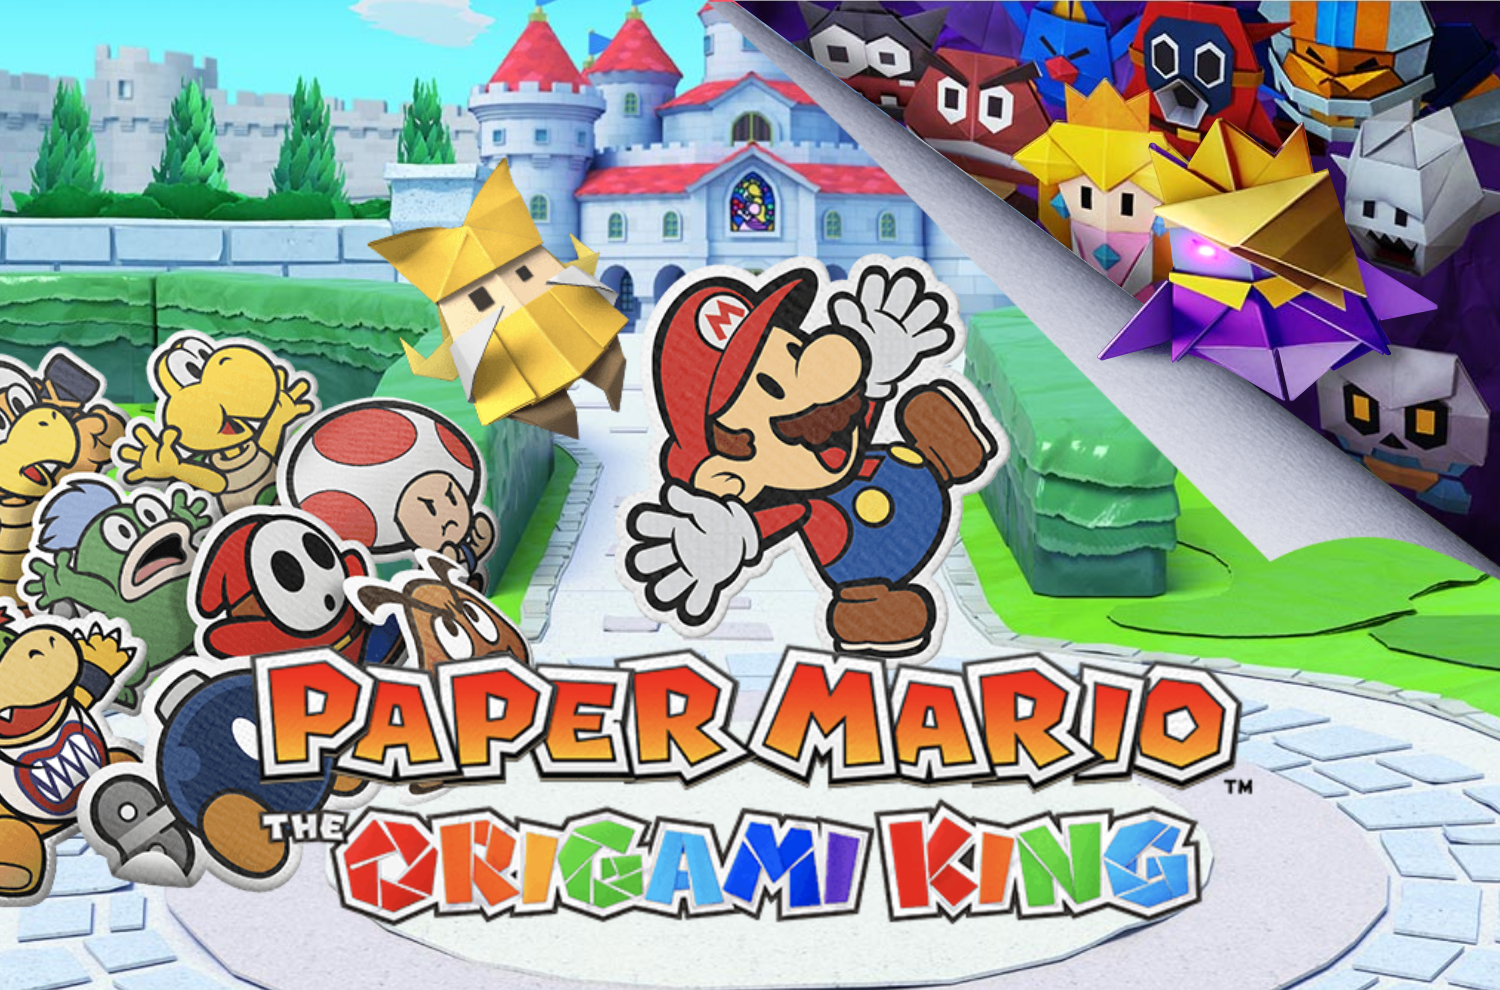 Paper Mario: The Origami King Arriving on Nintendo Switch in July 2020